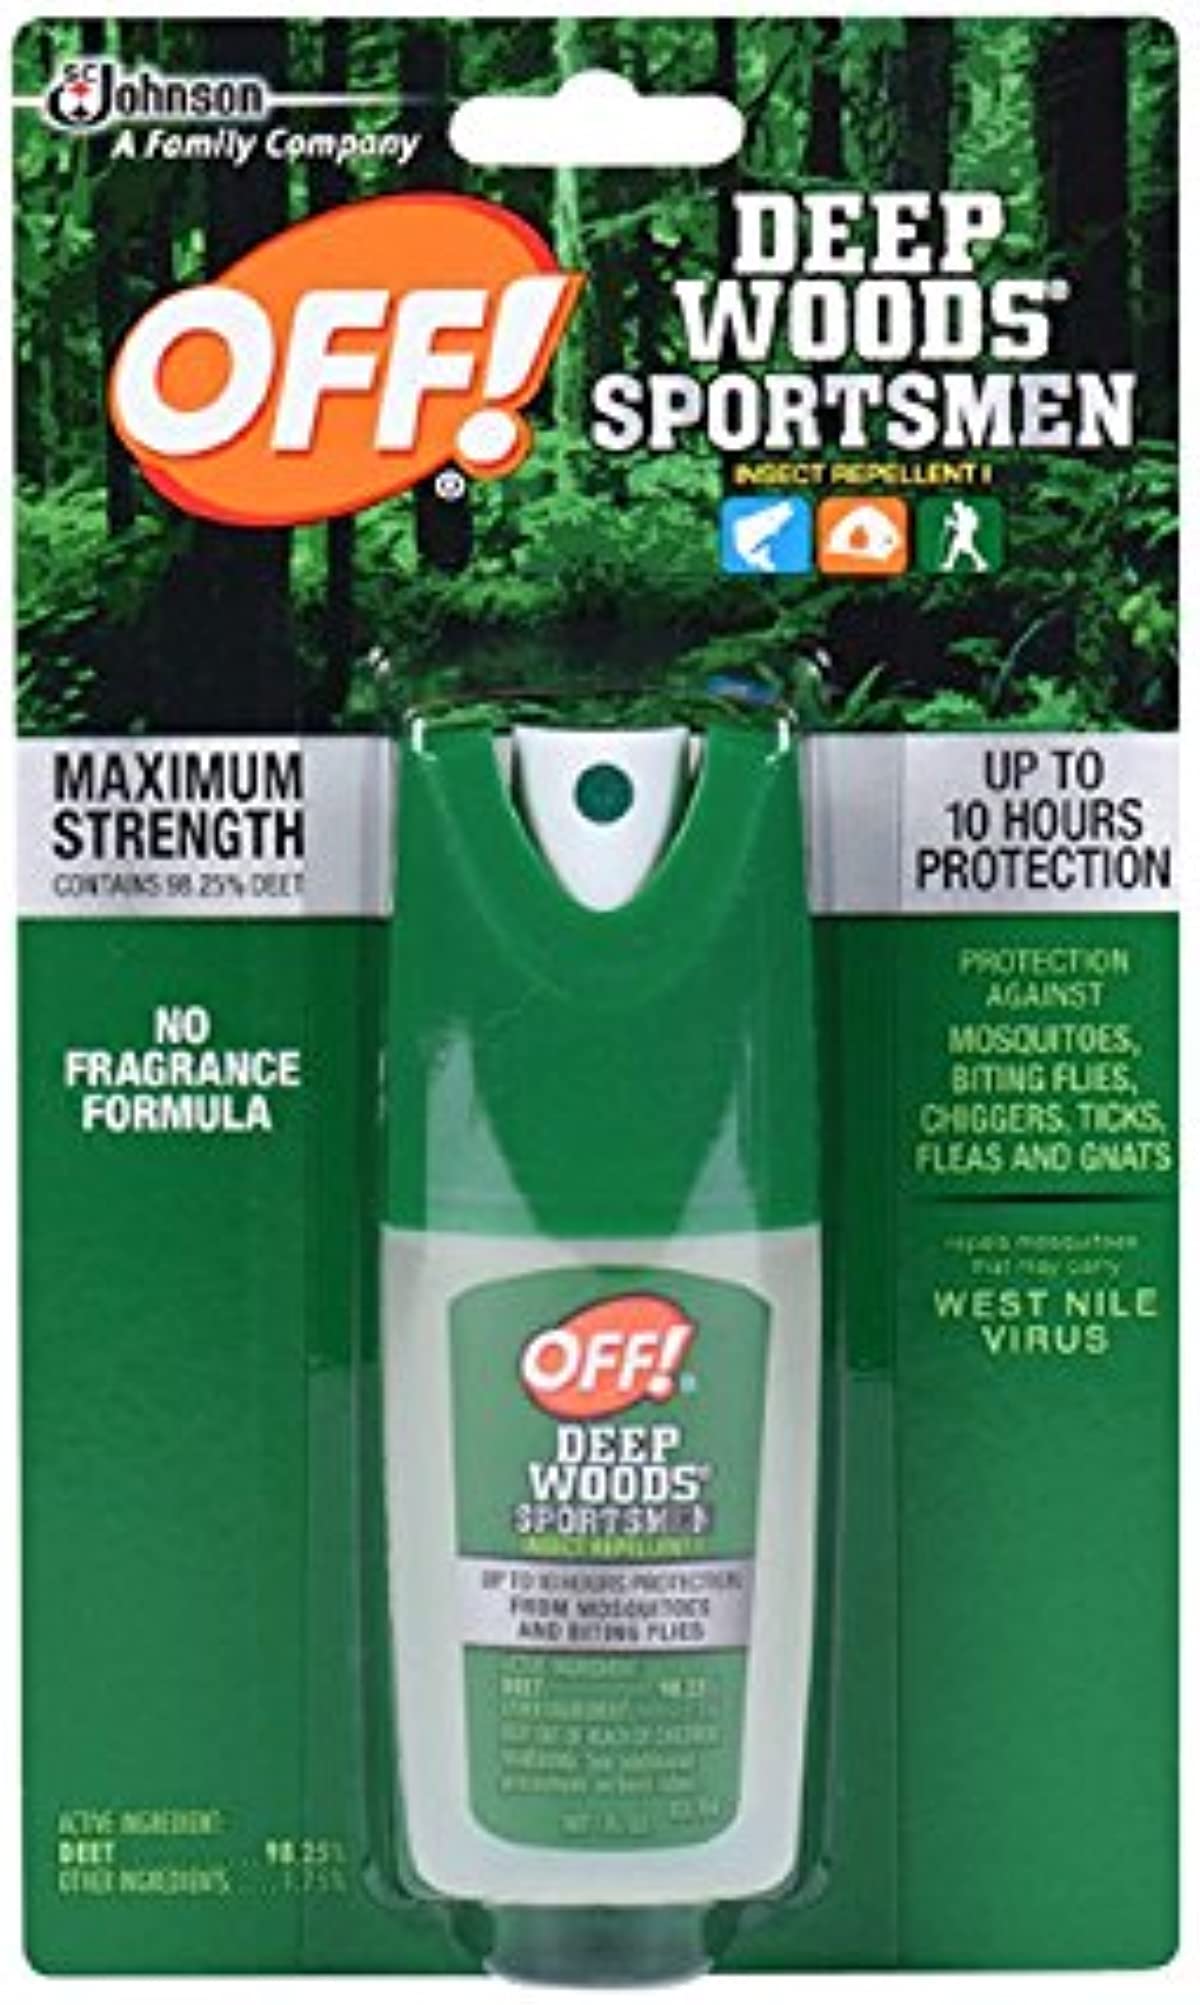 OFF! Deep Woods Sportsmen Insect Repellent Spritz, Maximum Strength, Bug Spray with up to 10 Hours of Protection, 1 oz (Pack of 12)